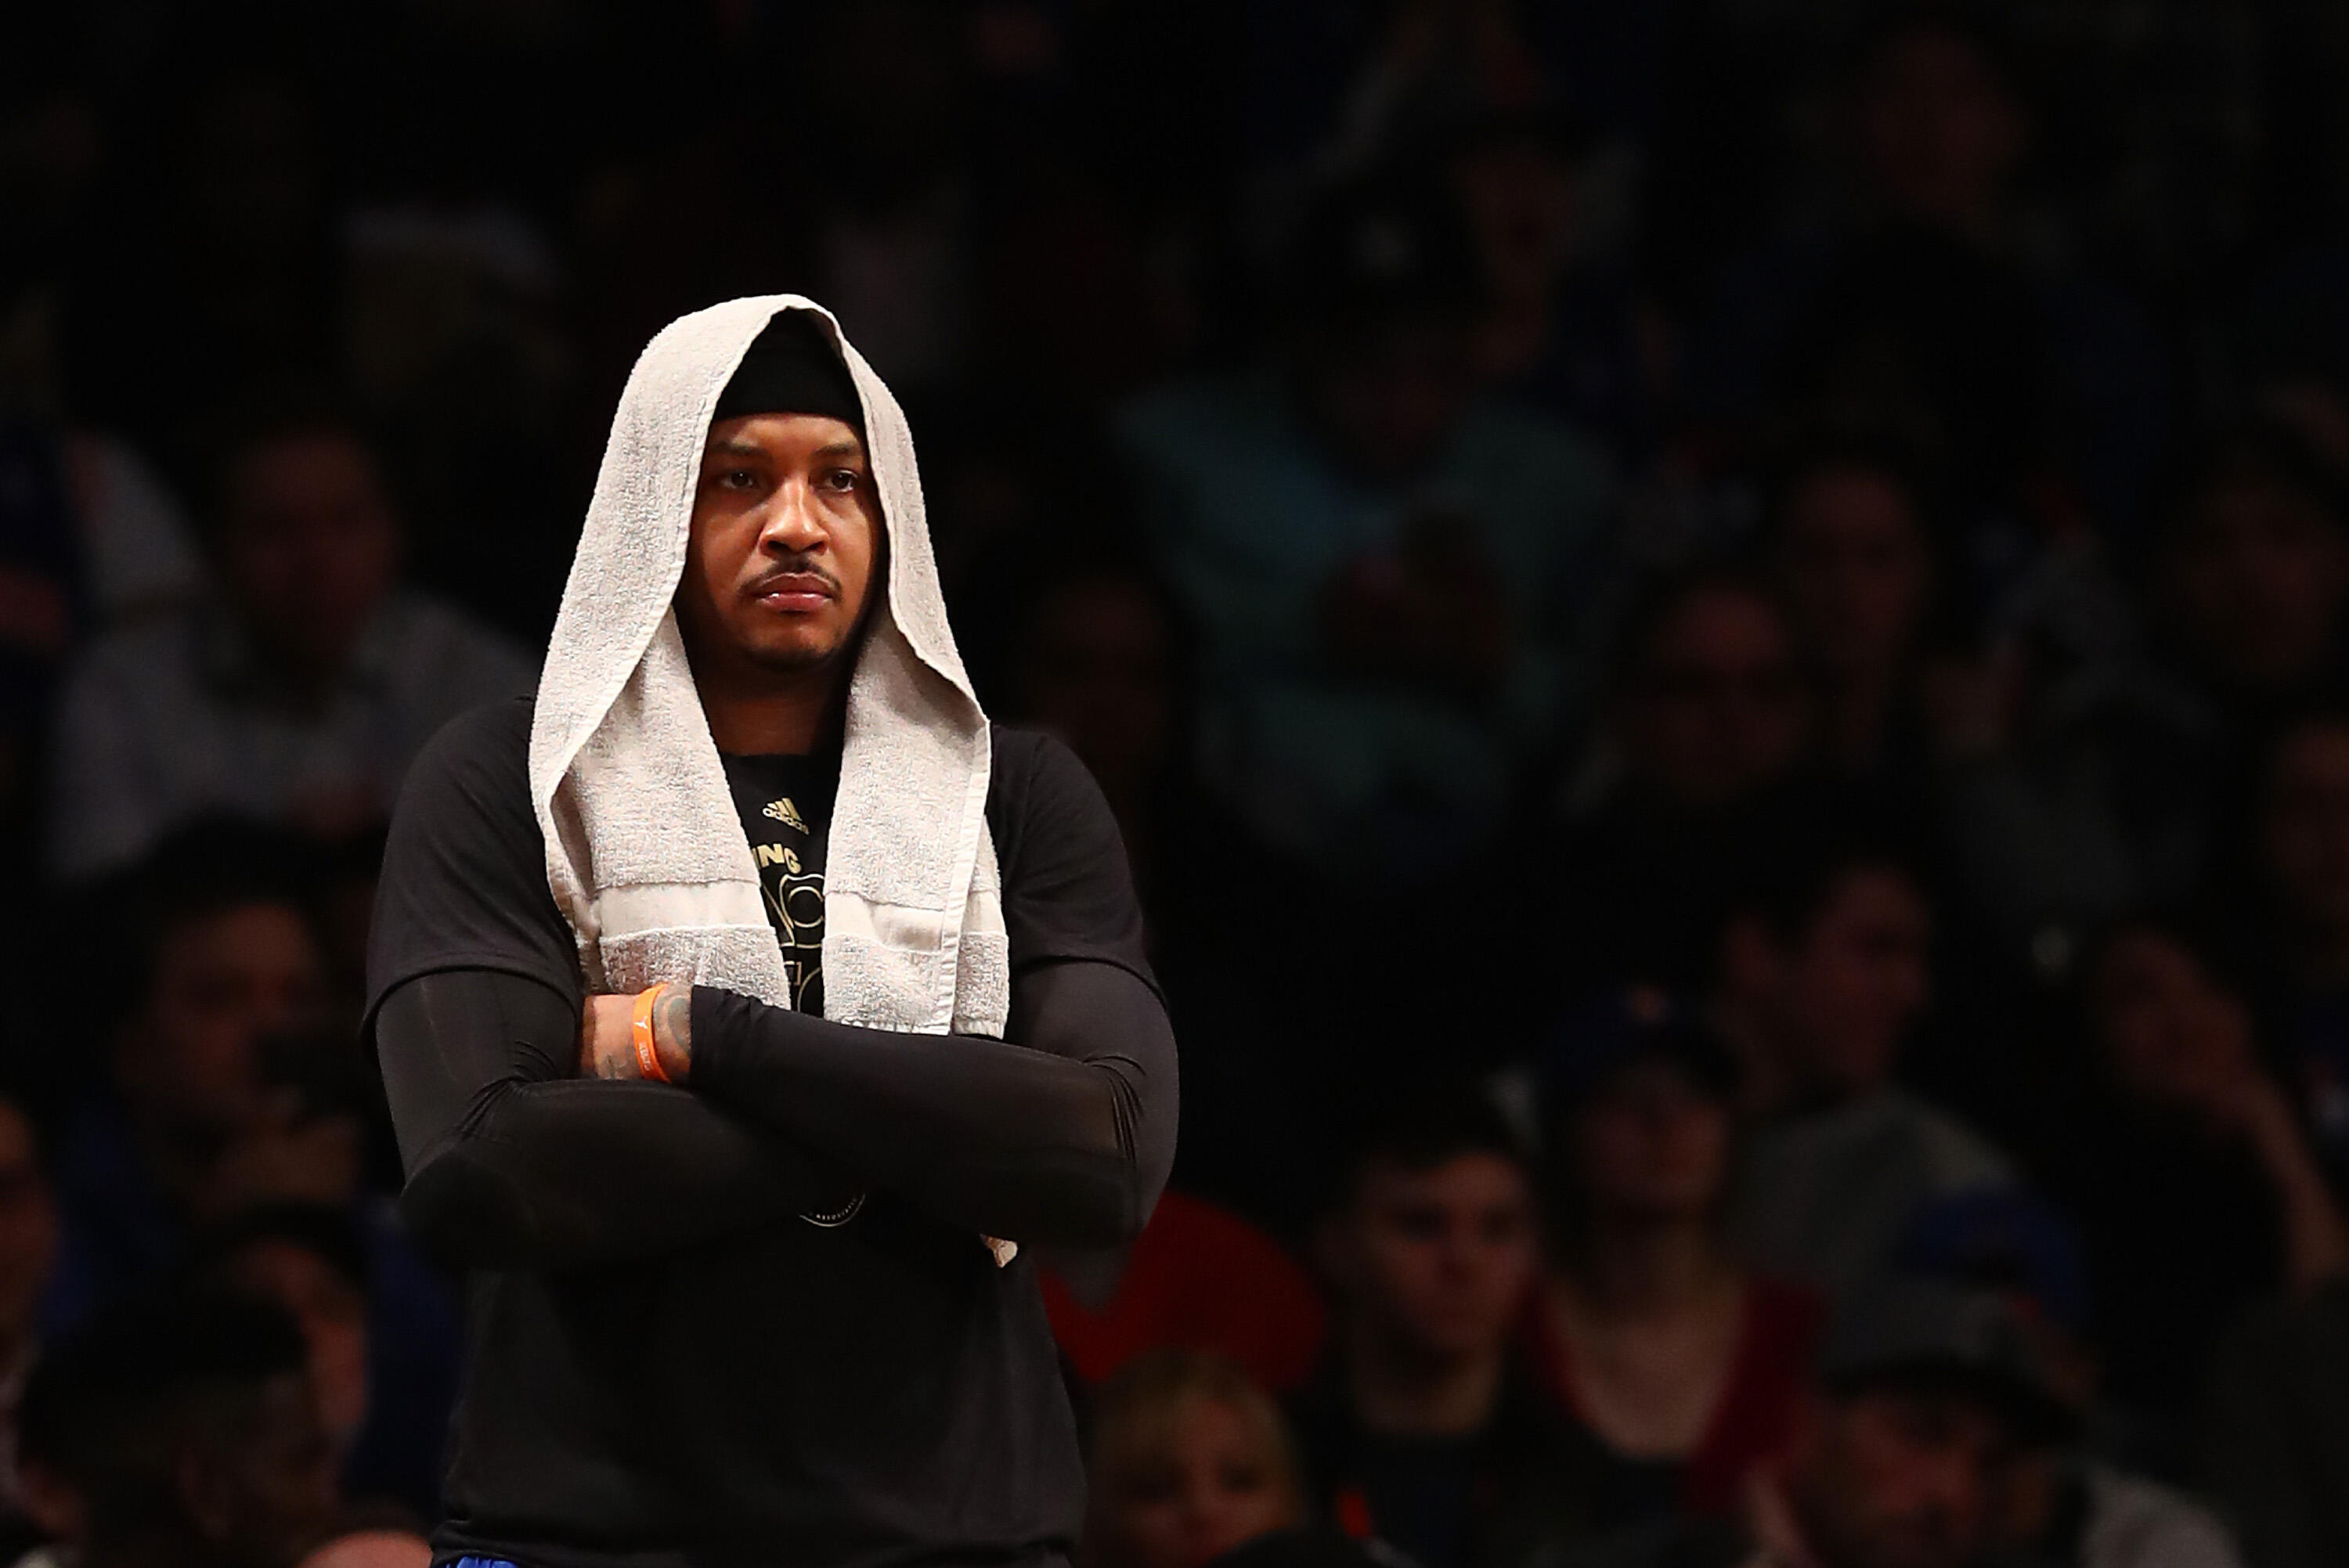 NEW YORK, NY - FEBRUARY 01:  Carmelo Anthony #7 of the New York Knicks looks on late in the final Quarter of their 95-90 win against the Brooklyn Nets  at the Barclays Center on February 1, 2017 in New York City.  NOTE TO USER: User expressly acknowledges